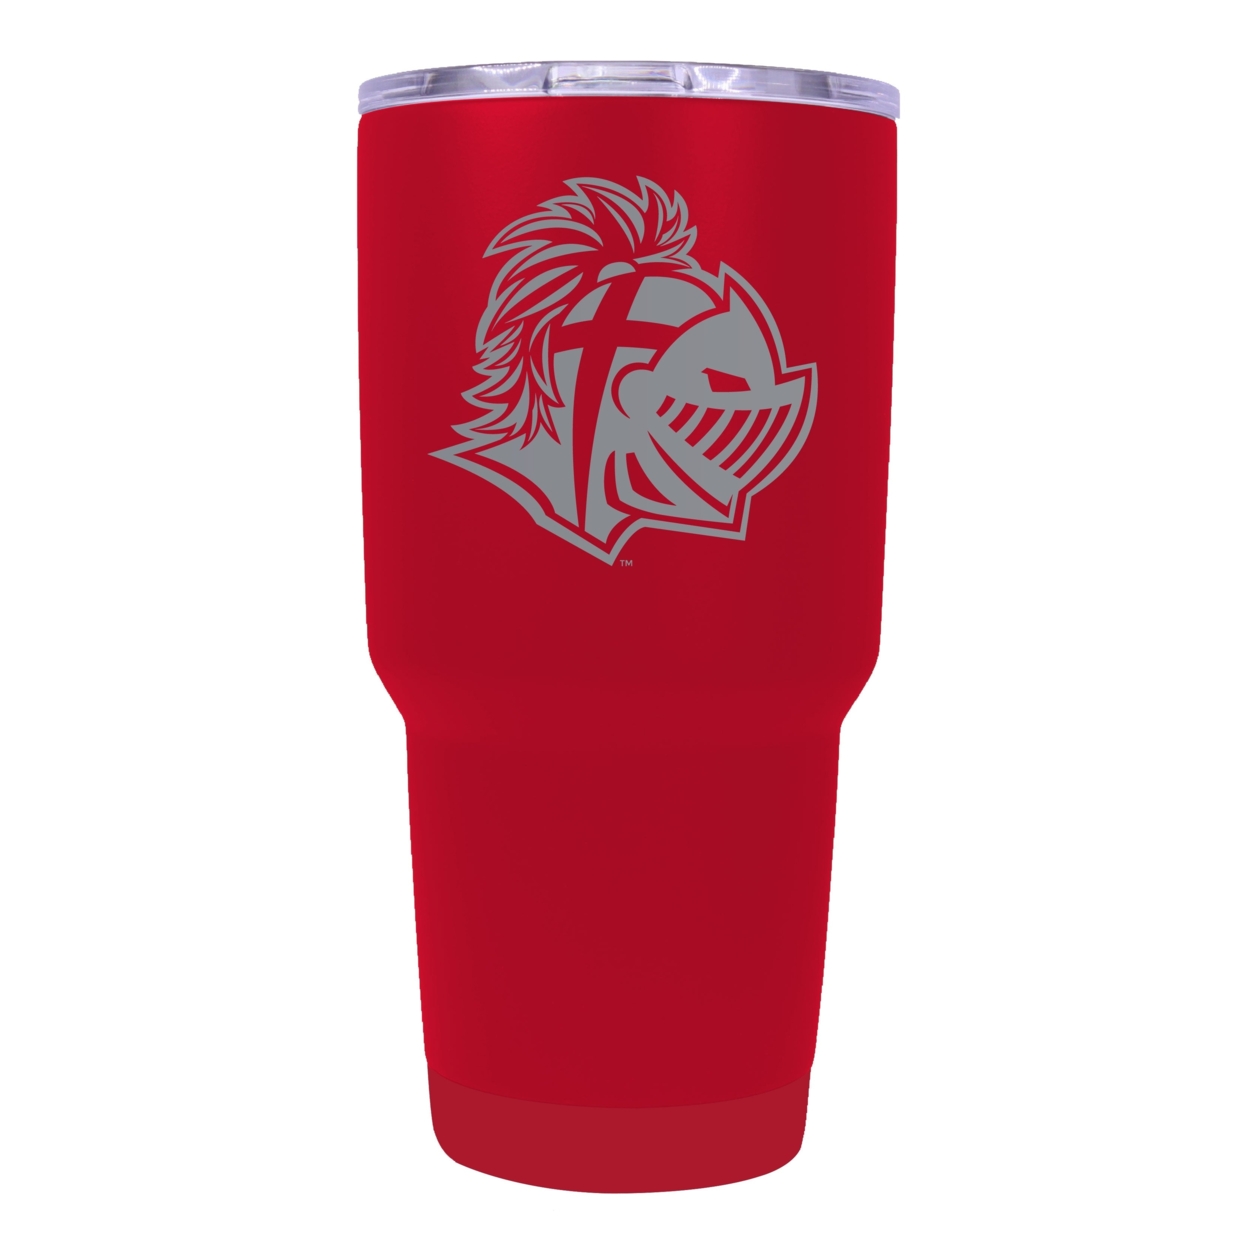 Southern Wesleyan University 24 Oz Laser Engraved Stainless Steel Insulated Tumbler - Choose Your Color. - Coral